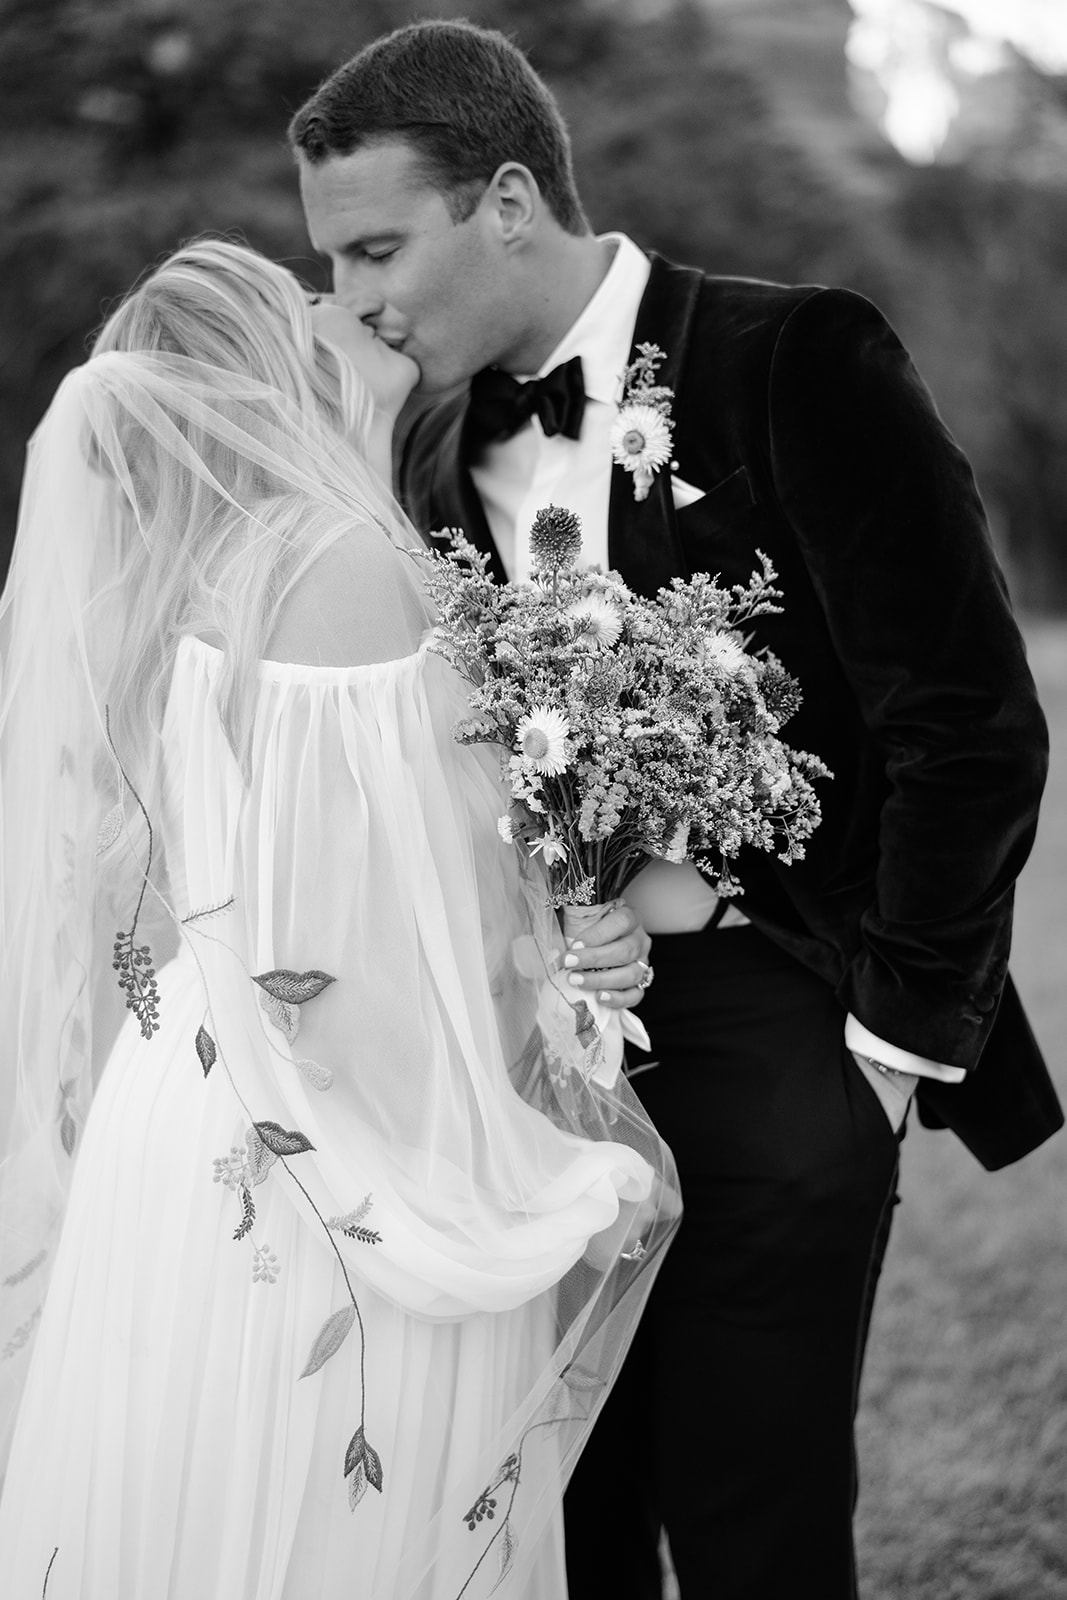 Close up of bride and groom kissing while bride is holding the bouquet